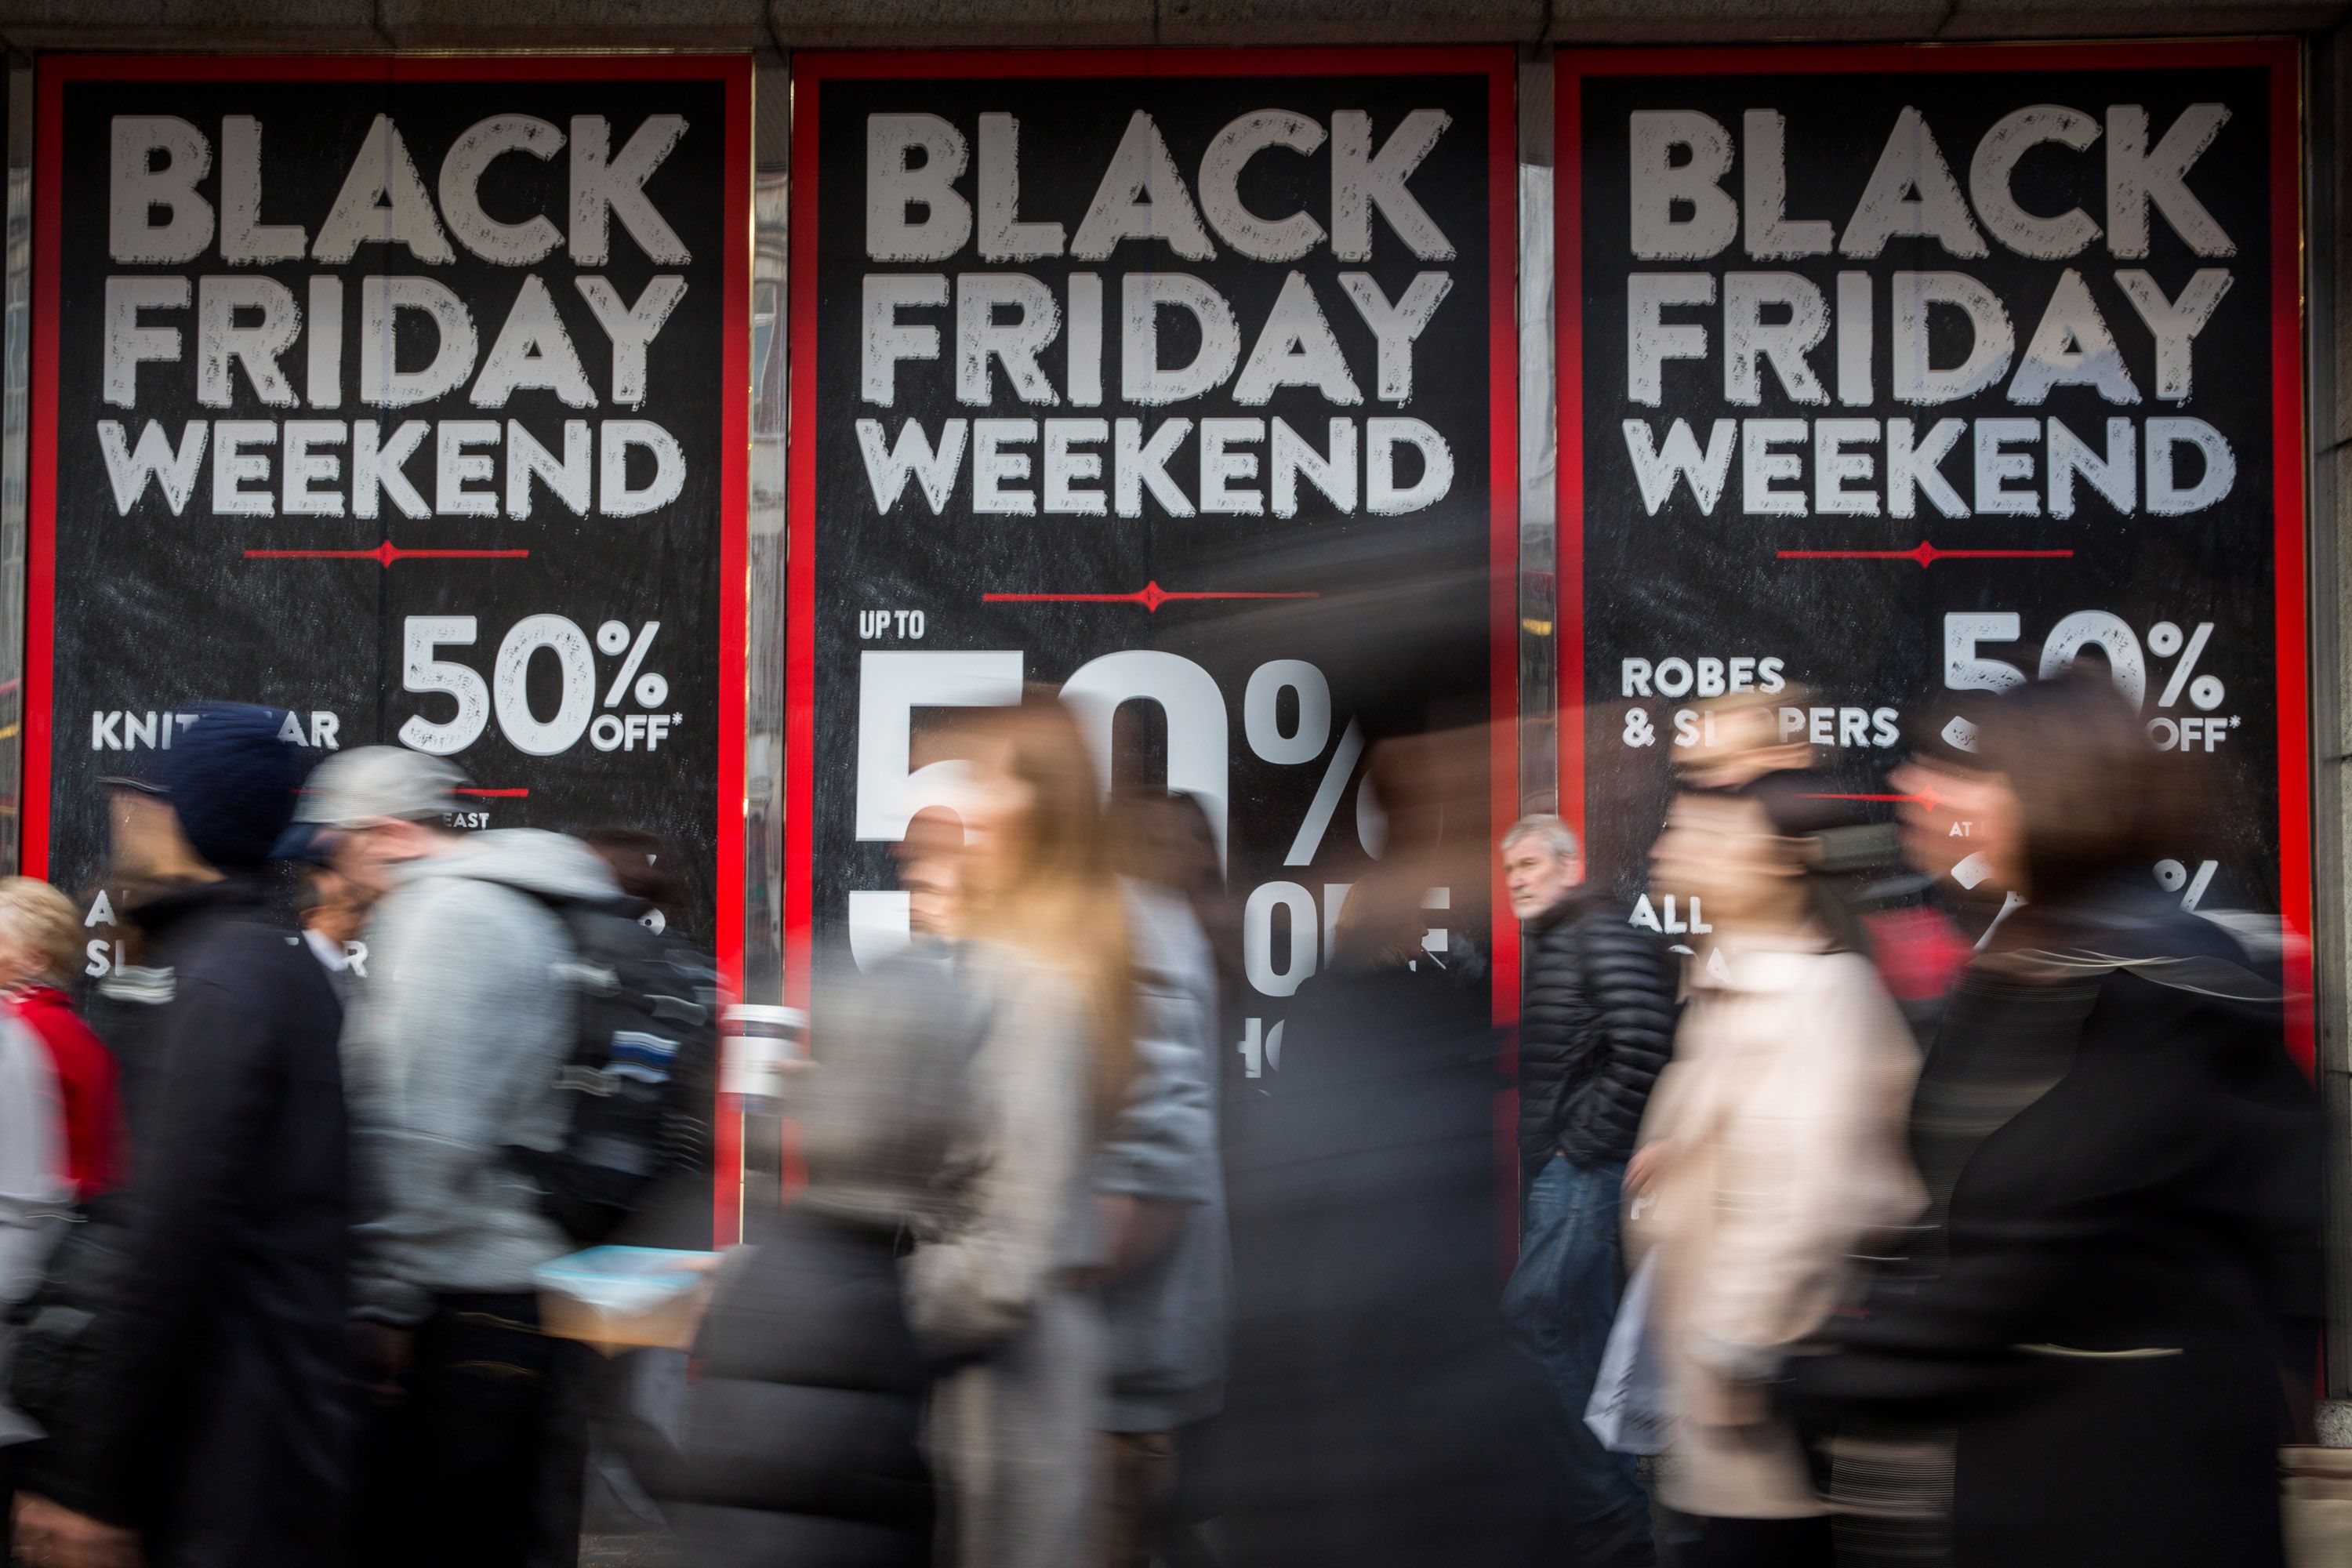 This Black Friday Shopper Made The Most Of Her Time In Line